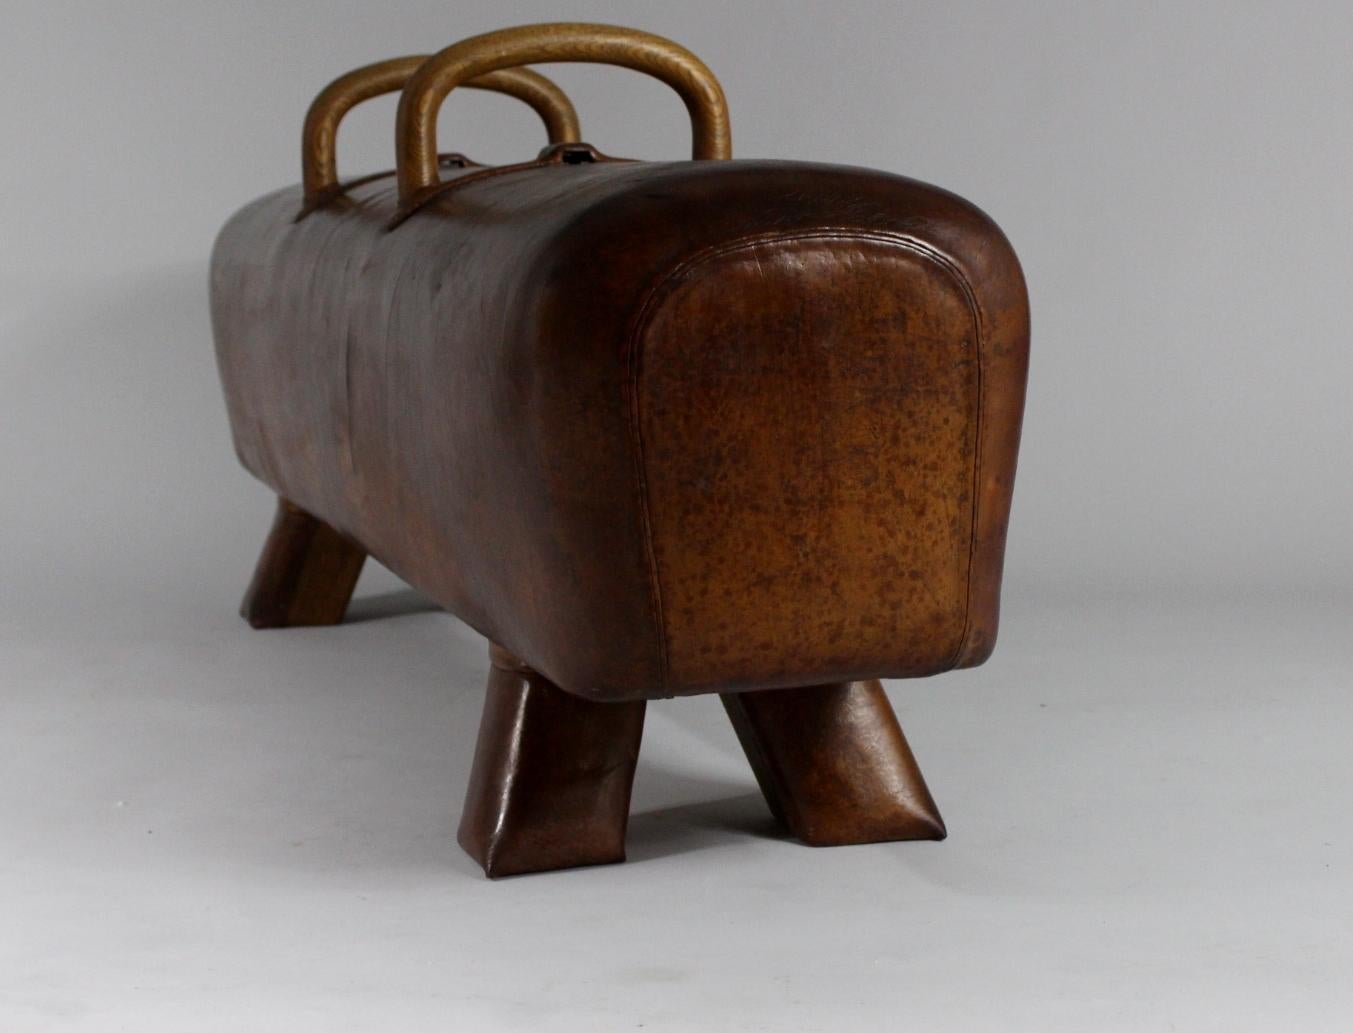 Leather gym pommel horse with handles from the 1930s. Very good condition, nice patina.